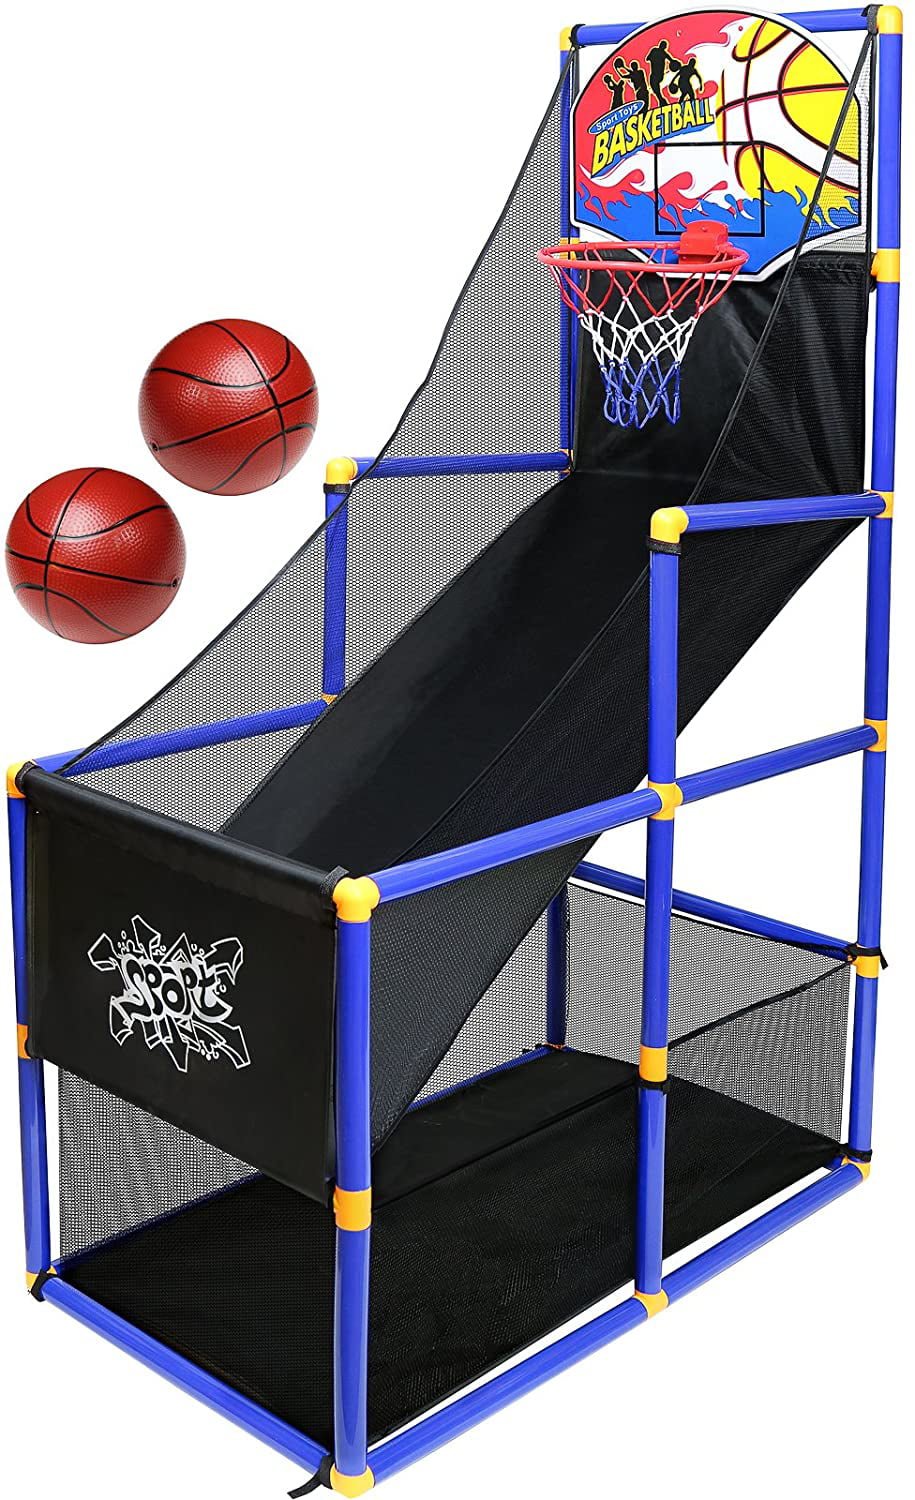 Basketball Board Play-set for Kids Wall Mounted Indoor Outdoor Sport Gift Toy 